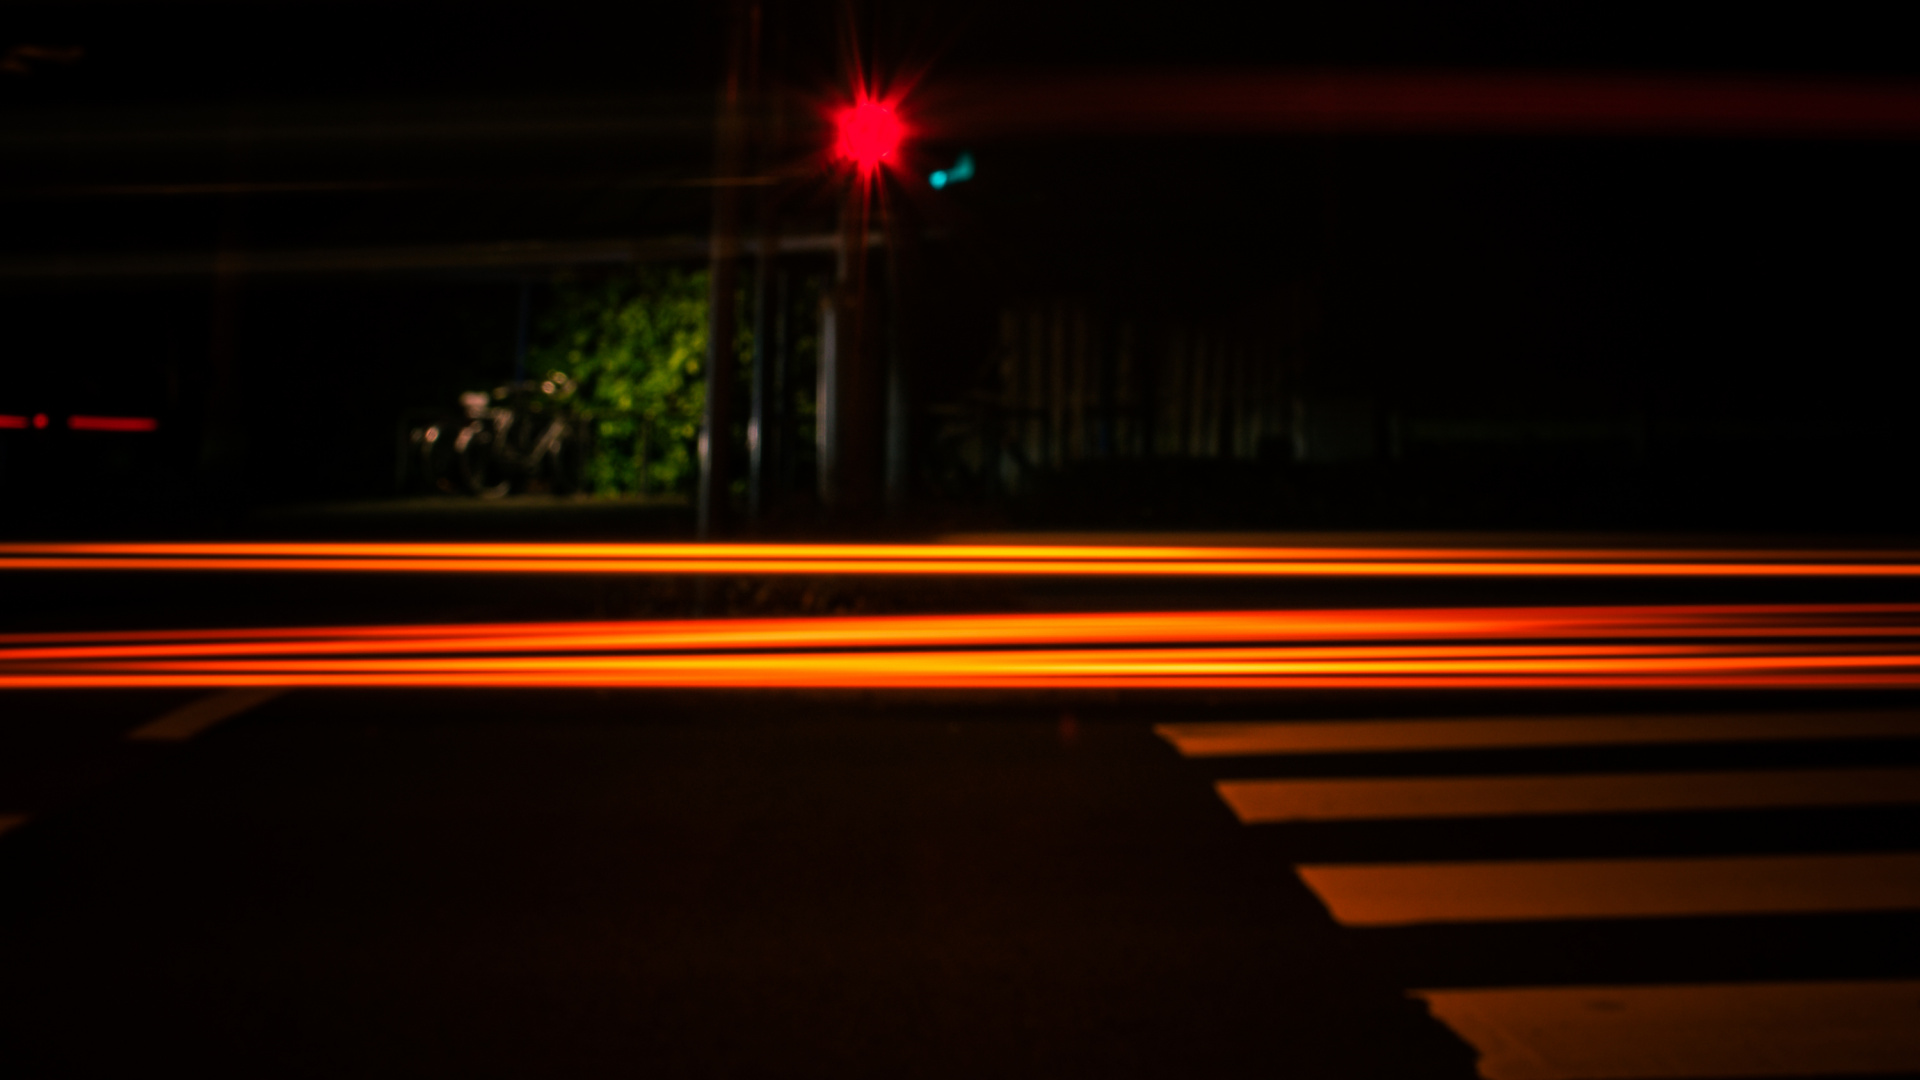 Red Light on The Road During Night Time. Wallpaper in 1920x1080 Resolution